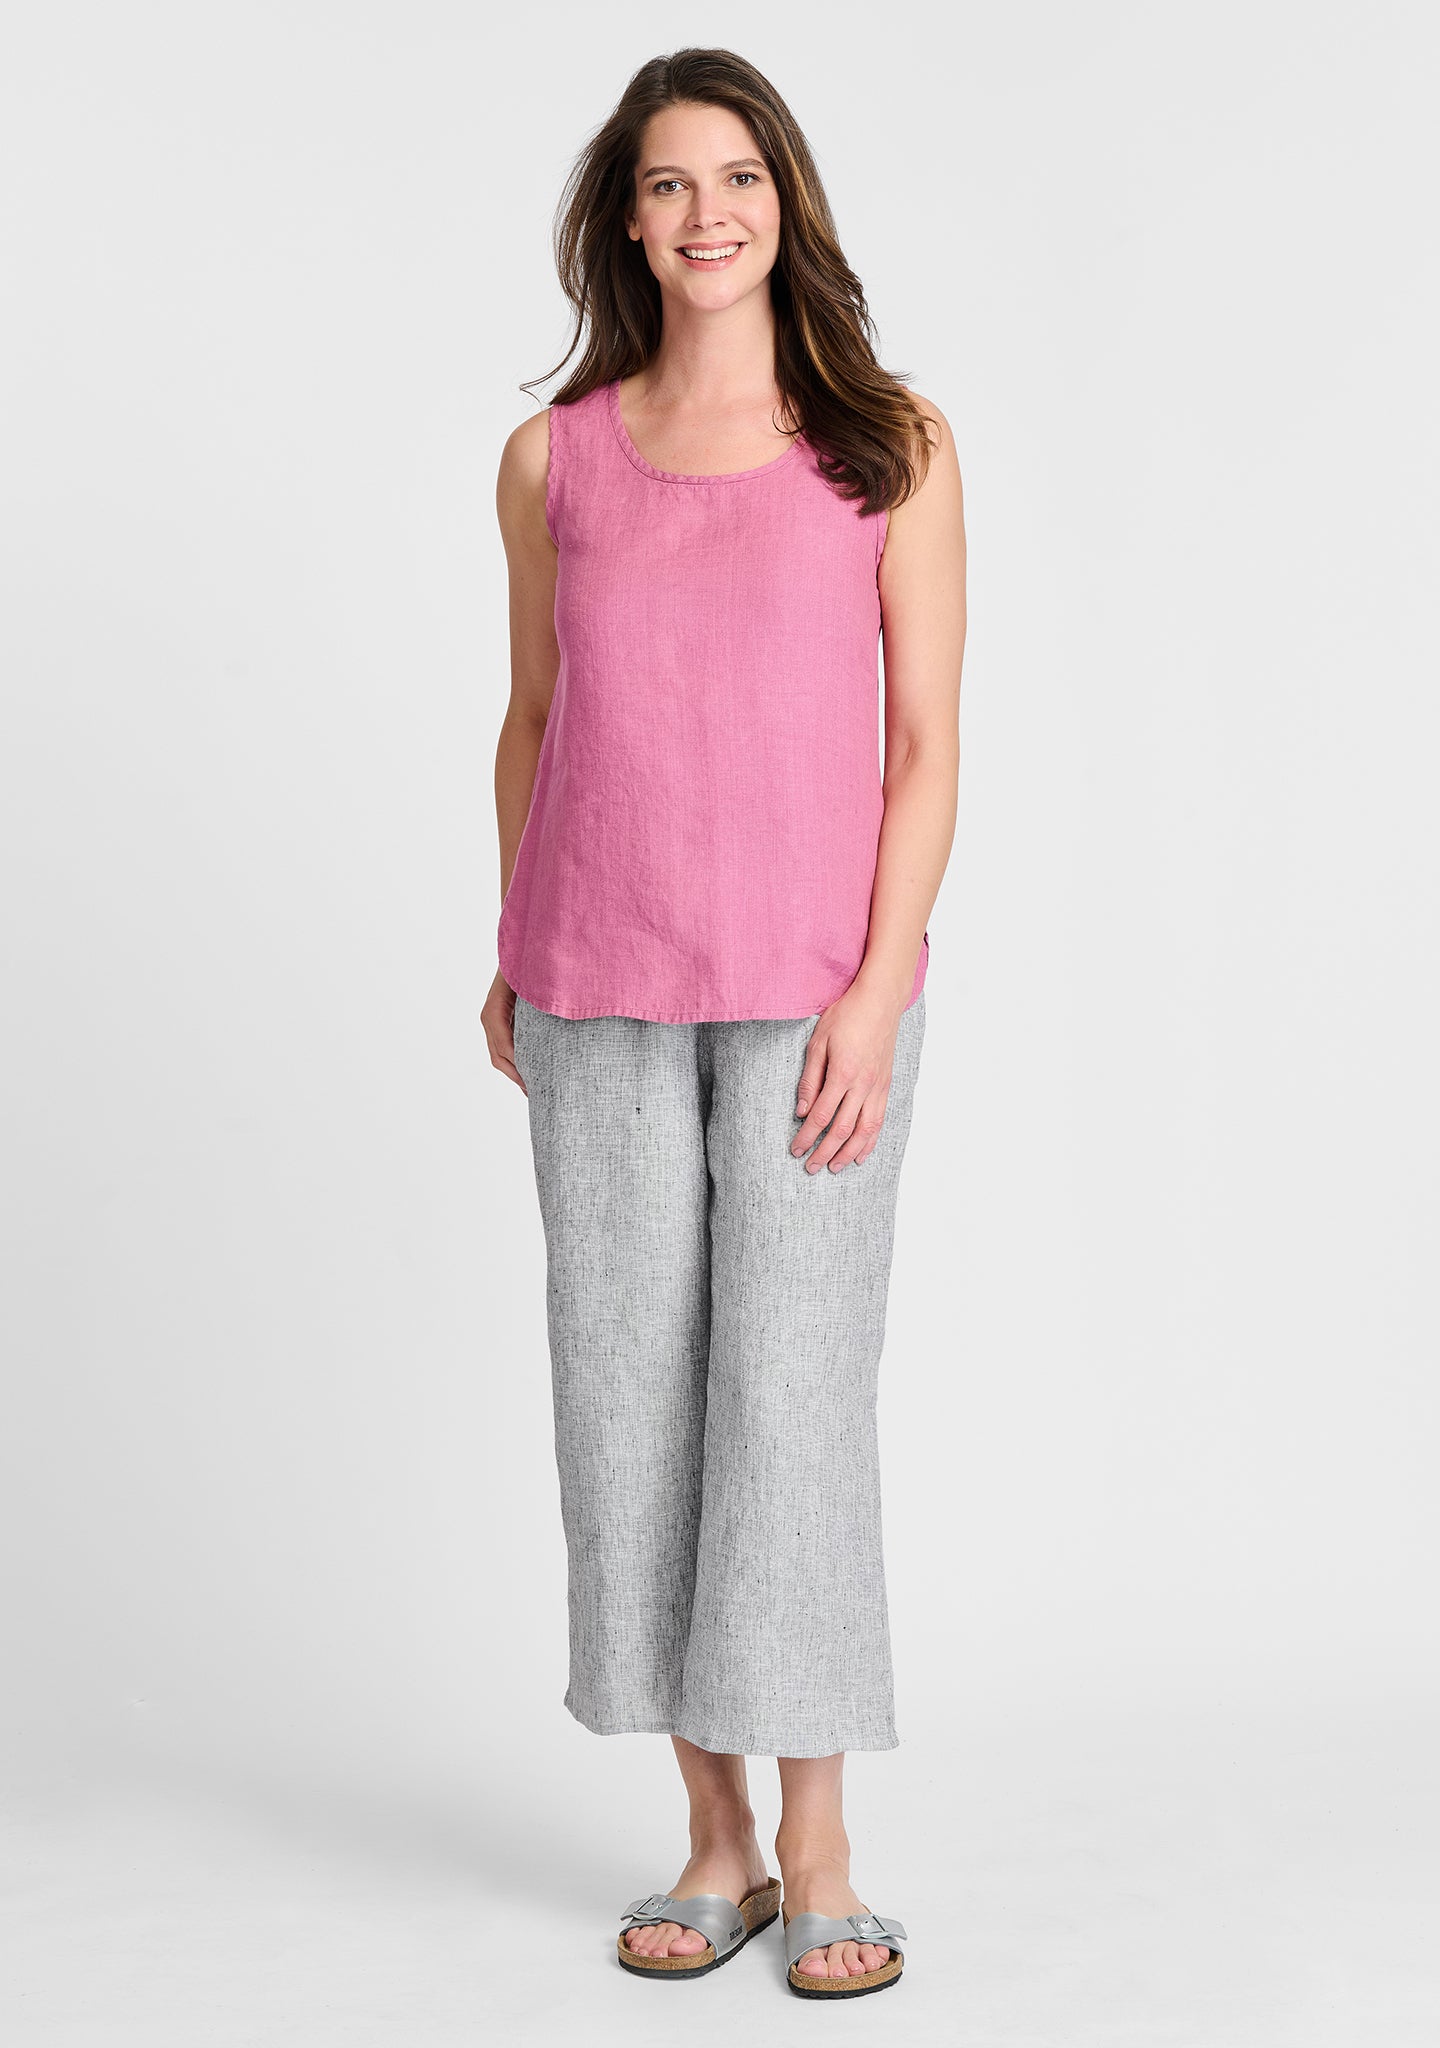 FLAX linen tank in pink with linen pants in grey